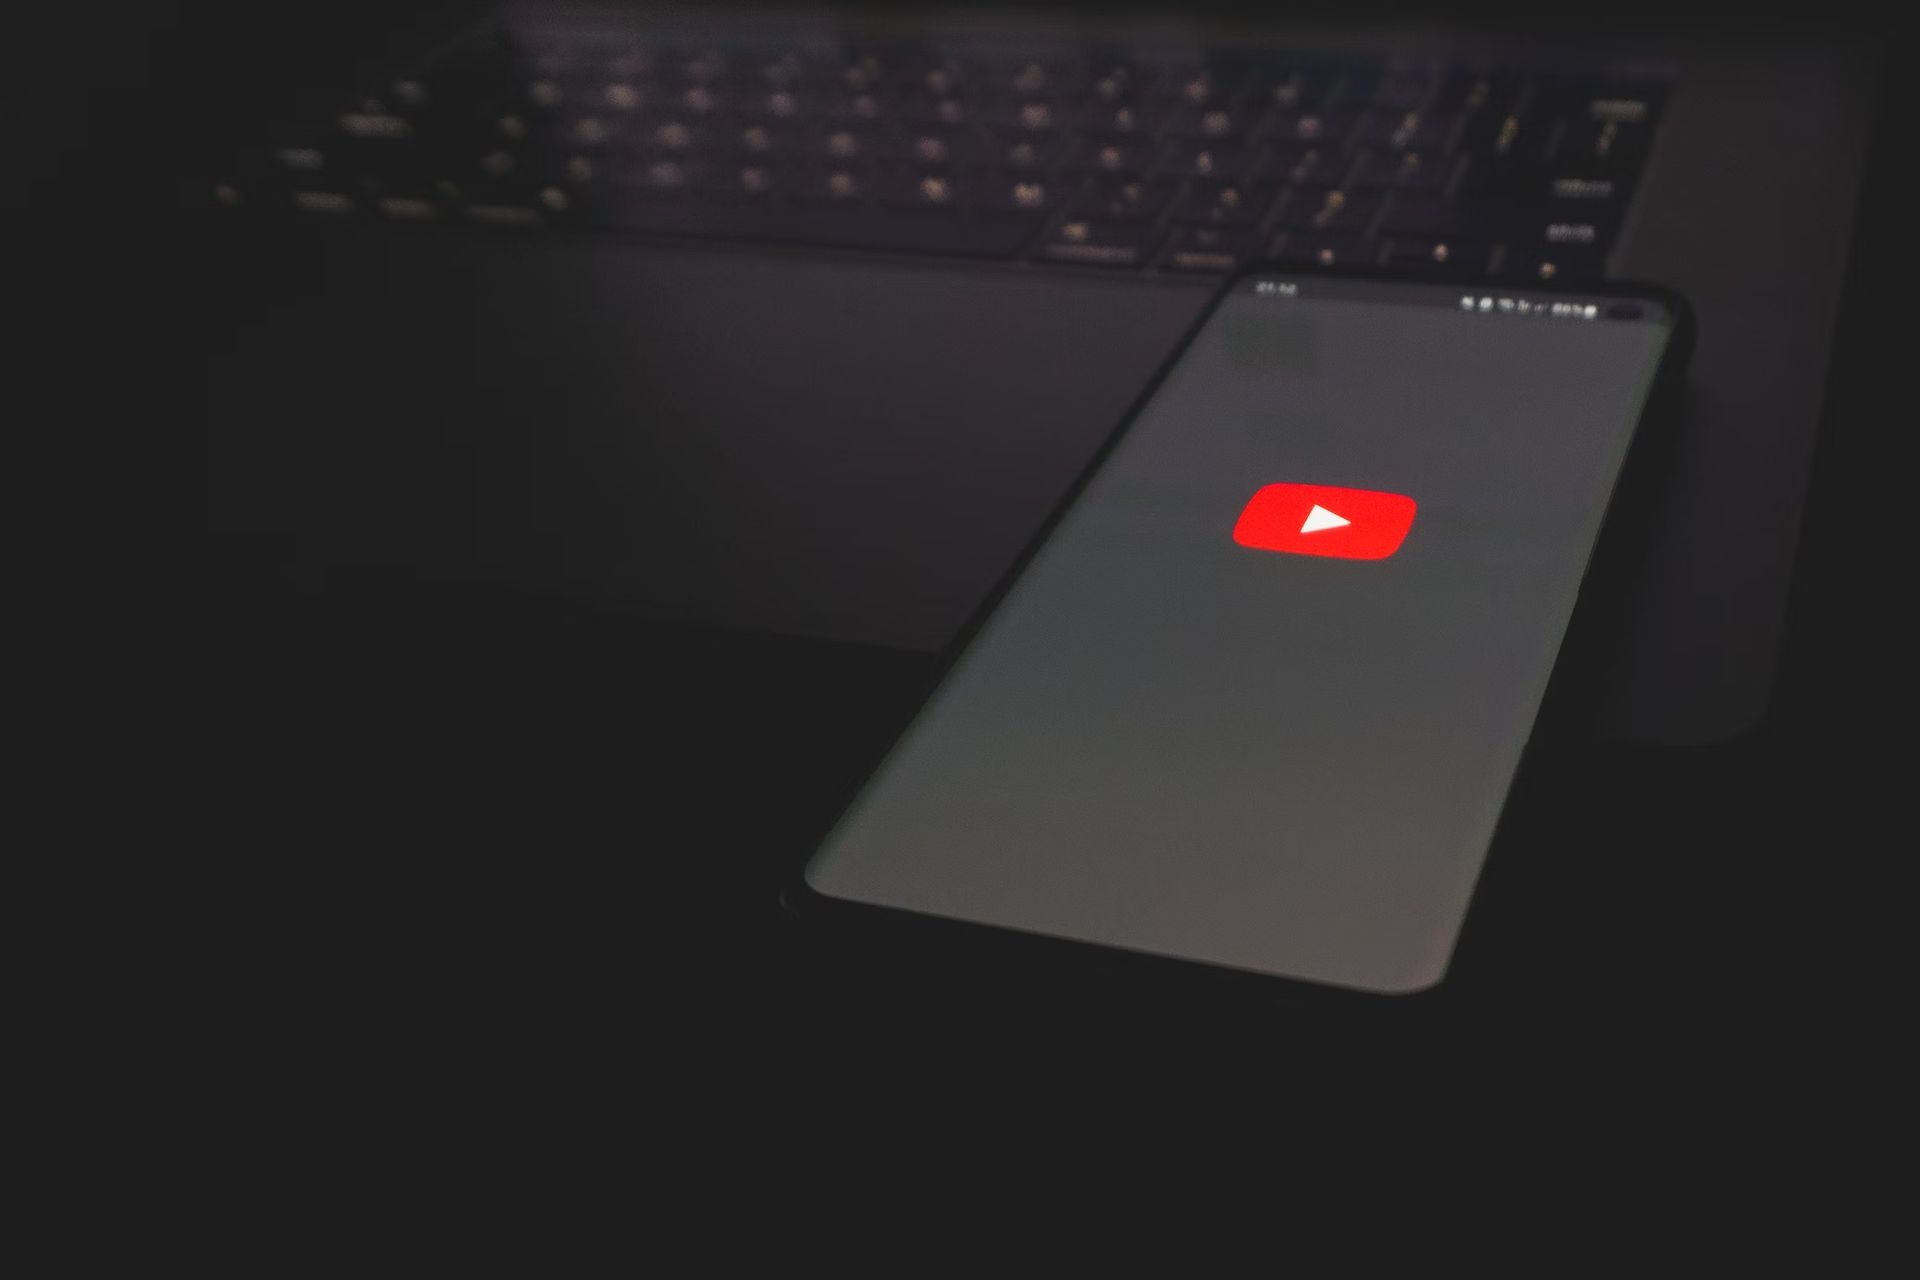 New YouTube update features you shouldn't miss